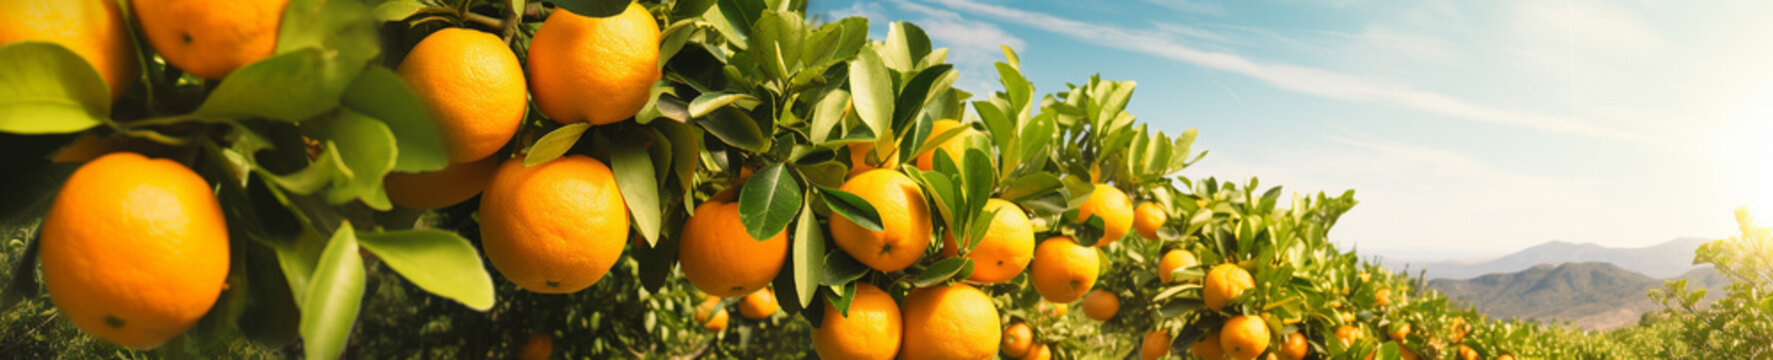 A Banner Photo of Oranges Growing on a Farm